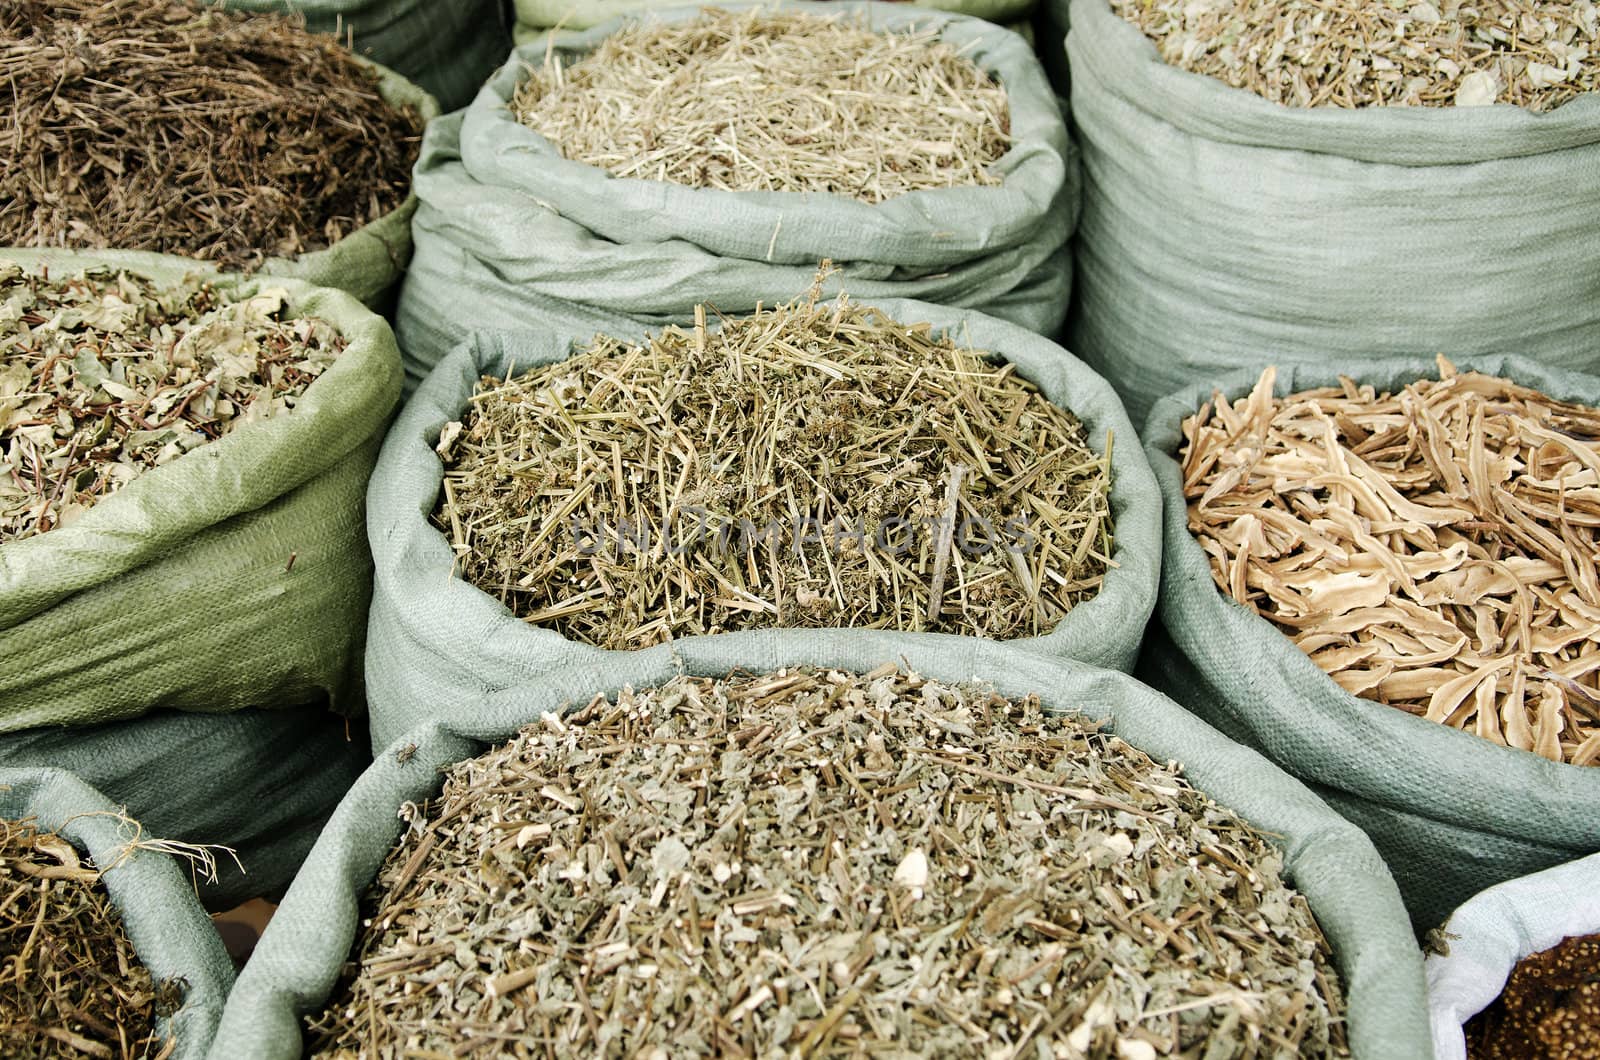 traditional herbs in vietnam market by jackmalipan